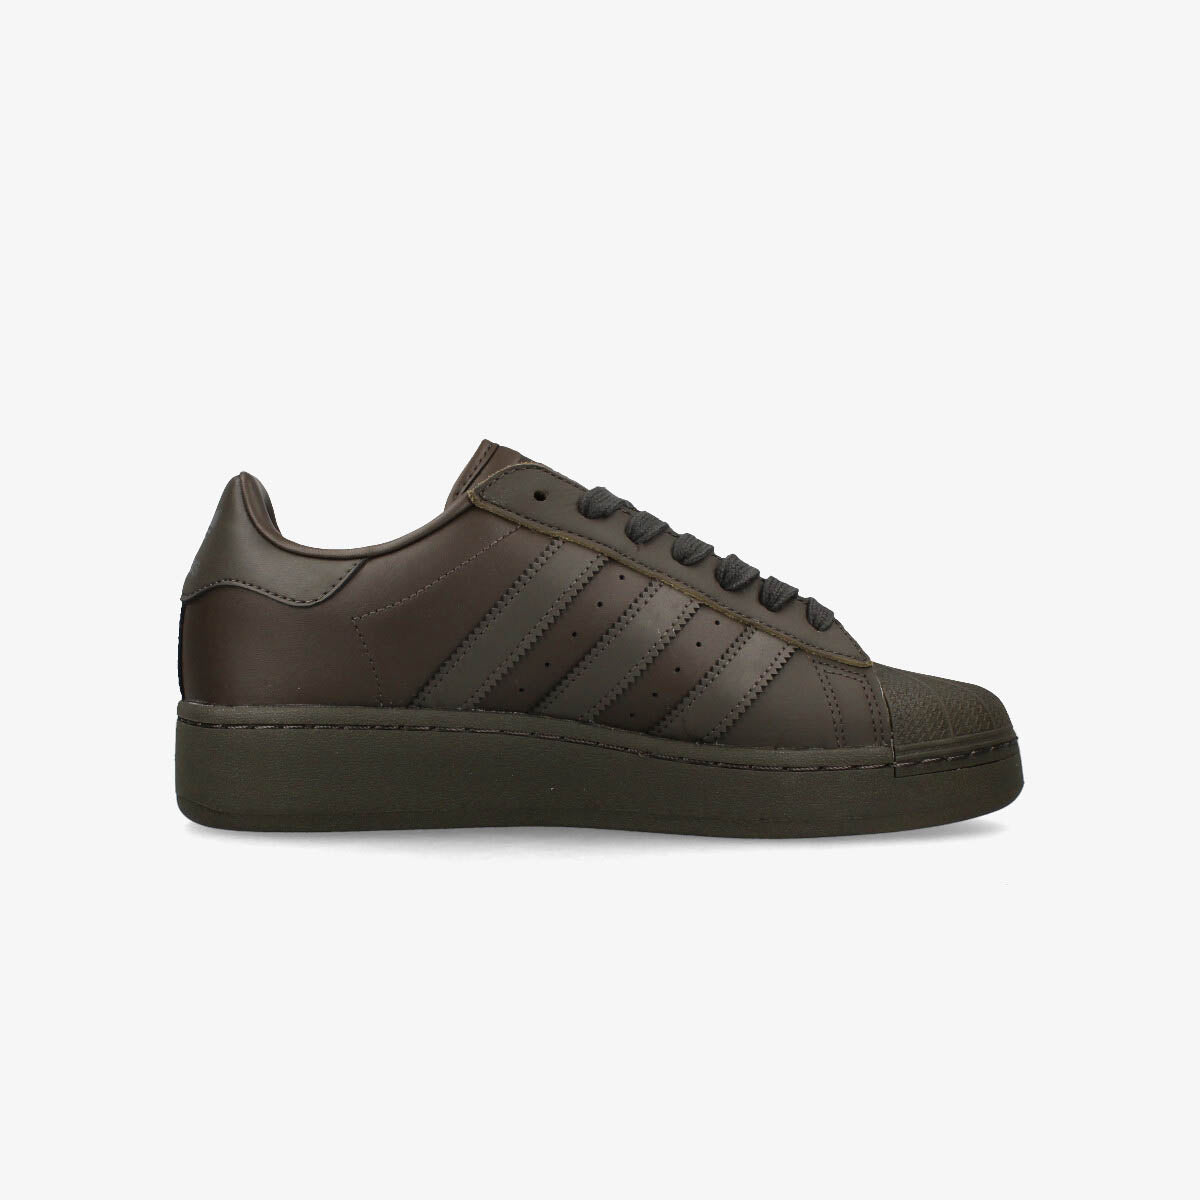 adidas SUPERSTAR XLG SHADOW OLIVE/SHADOW OLIVE/CORE BLACK ig0735